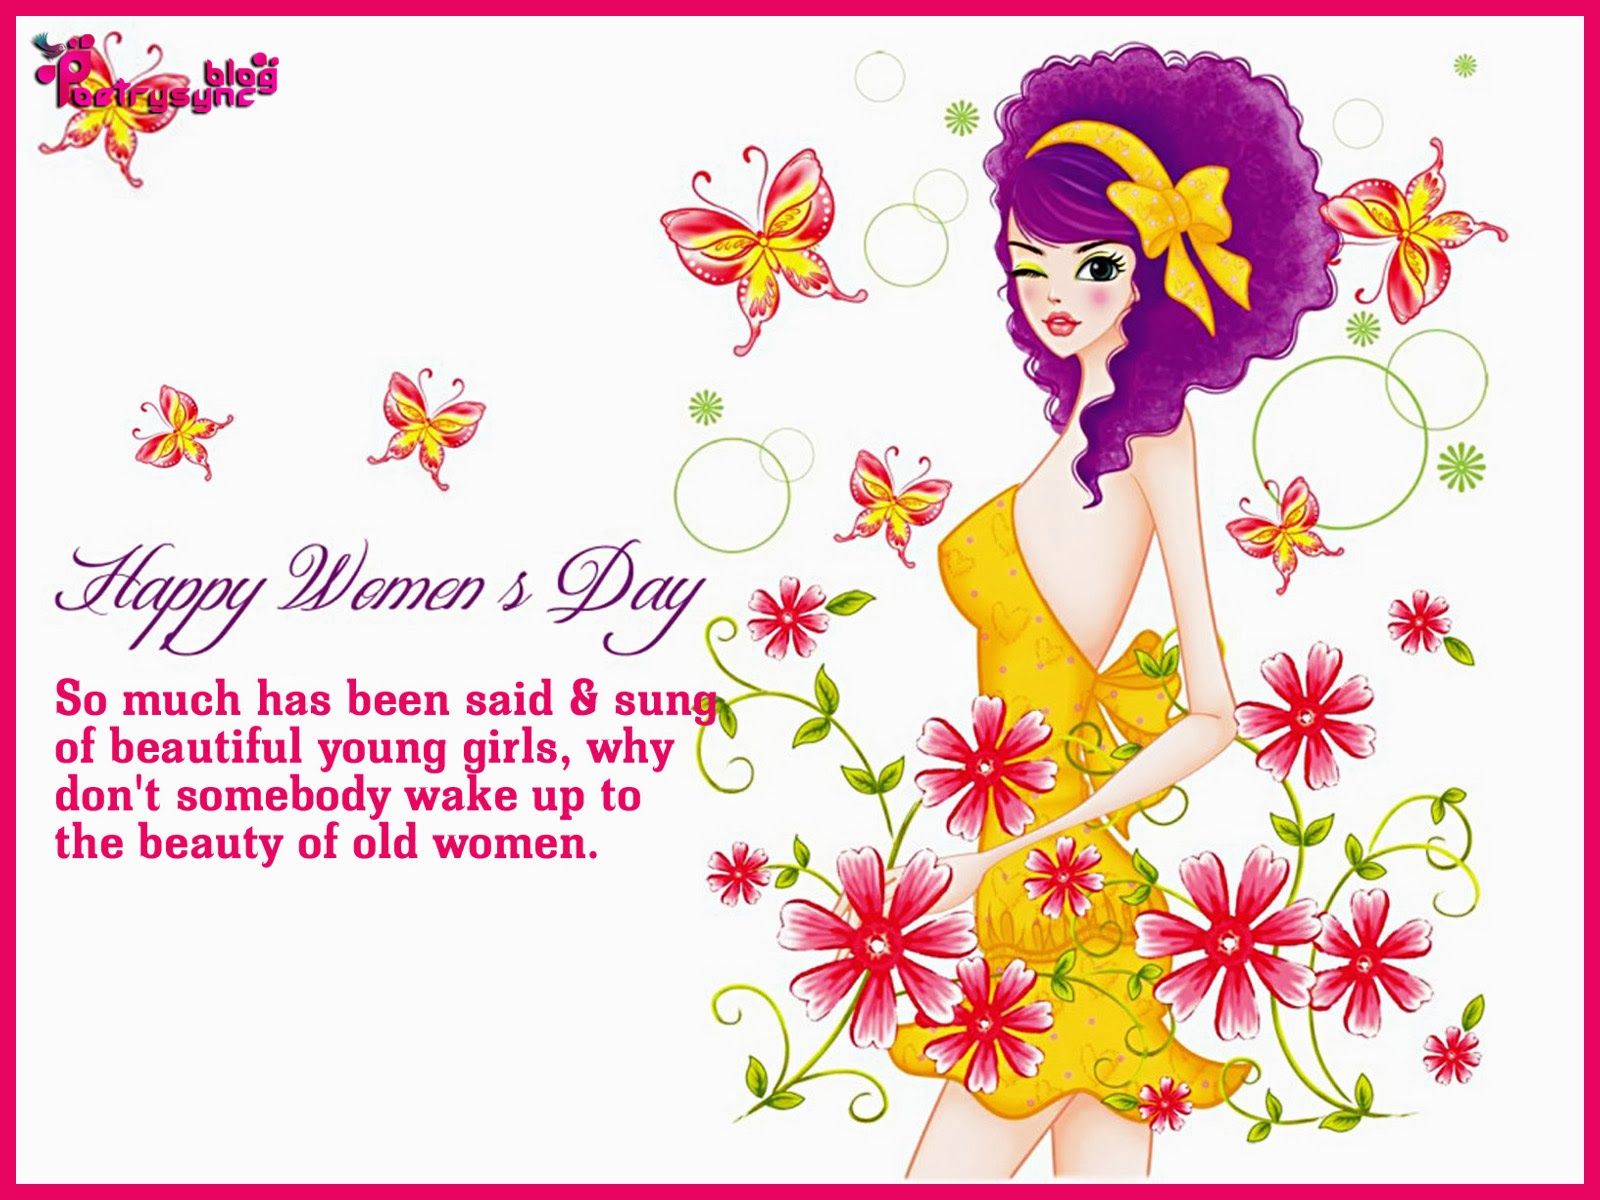 Happy Women's Day Wishes Quote Picture 8 March Image. Happy woman